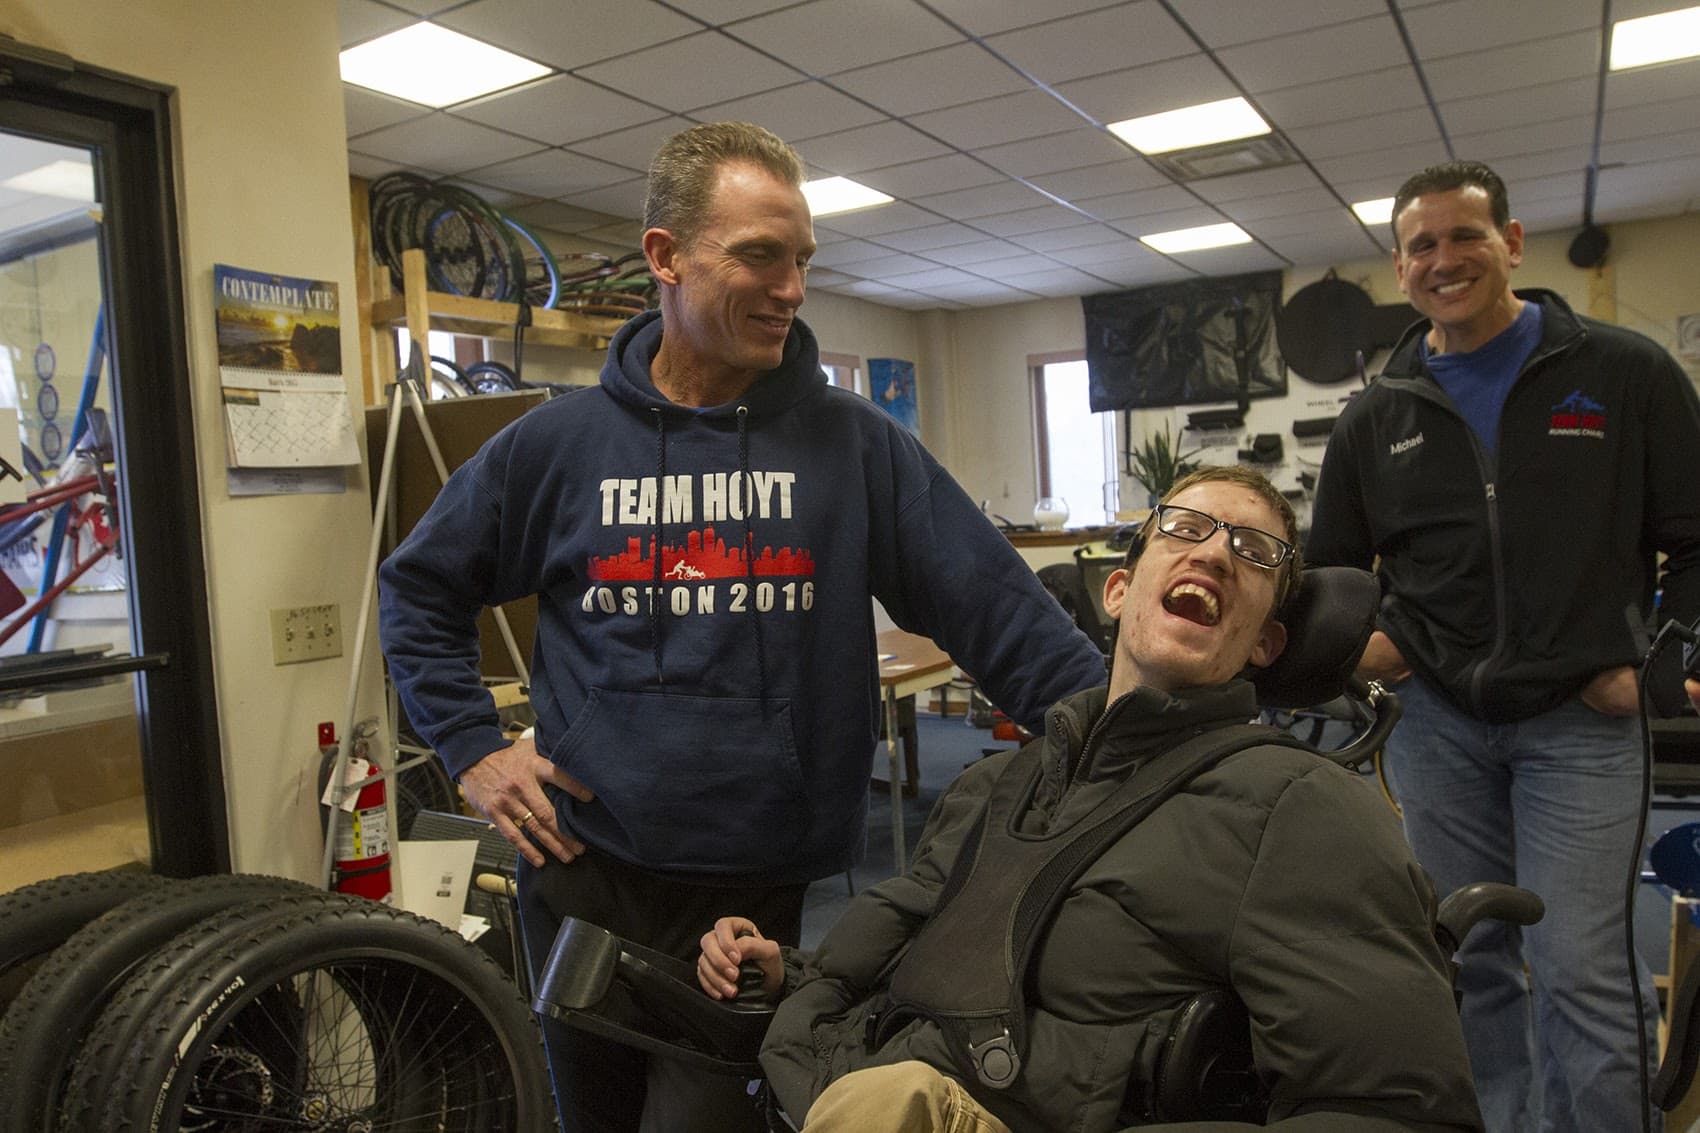 Ted Painter, left, and Nick Draper, will be competing in the 2017 Boston Marathon, using a chair built at Southbridge Tool and Manufacturing. Mike DiDonato, right, helped steer his family’s business into making Team Hoyt Running Chairs. (Joe Difazio for WBUR)